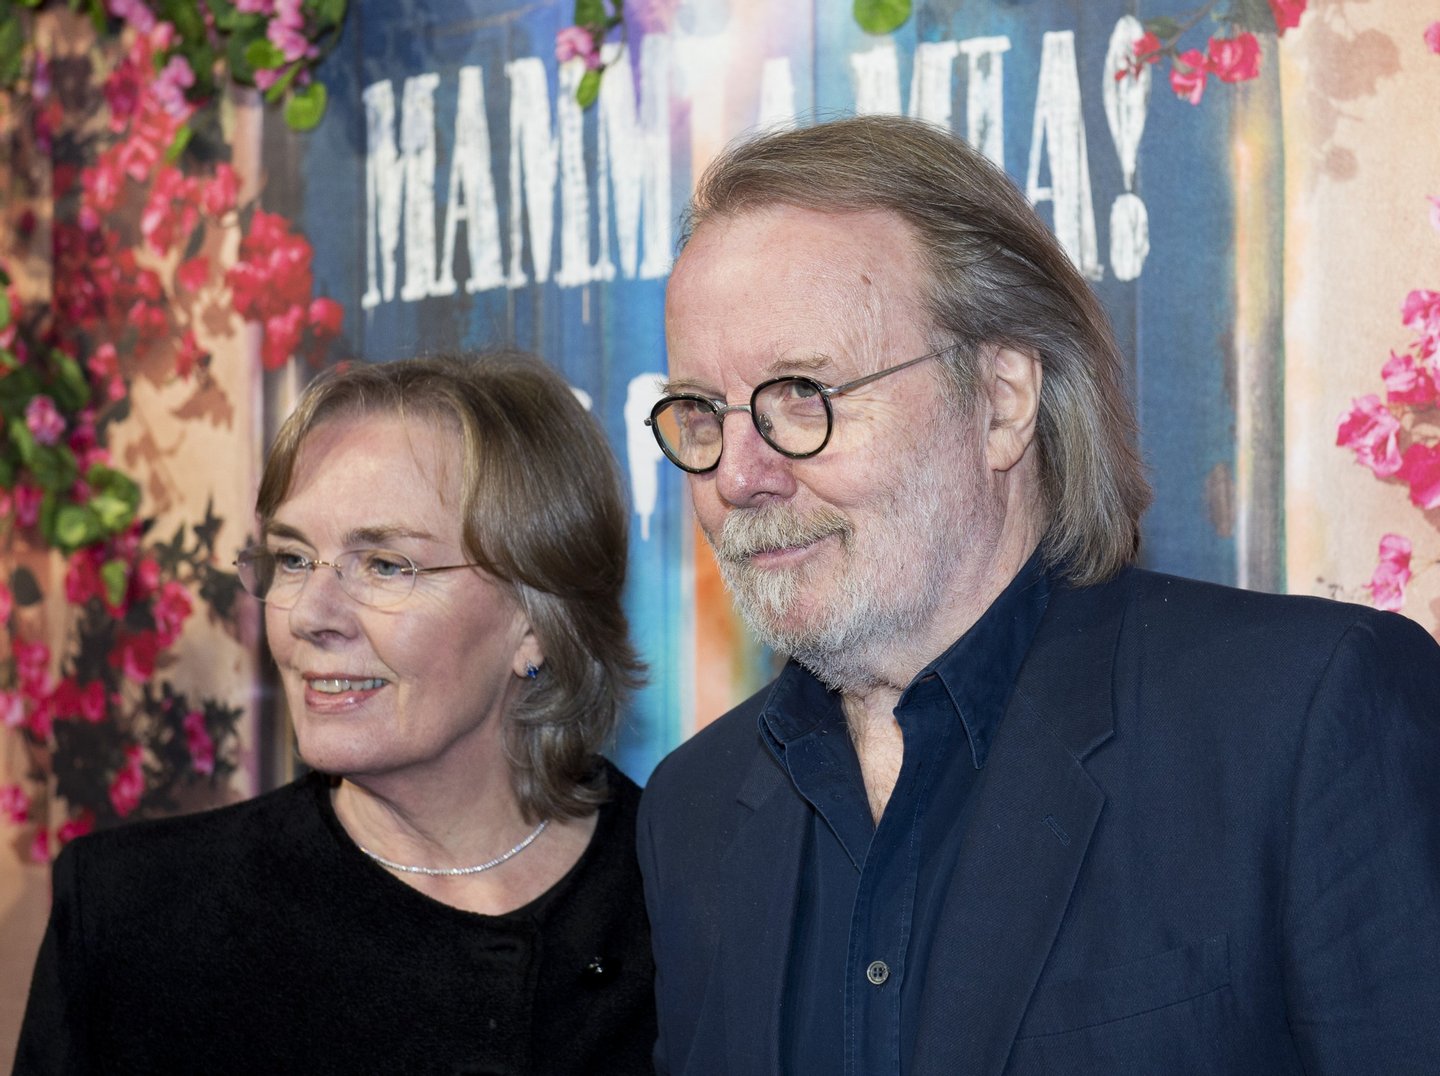 Benny Andersson (R), a member of Swedish disco group ABBA attends the opening of "Mamma Mia! The party", a new restaurant in Stockholm where people can eat while watching a show based on ABBA's songs on January 20, 2016 in Stockholm. / AFP / JONATHAN NACKSTRAND (Photo credit should read JONATHAN NACKSTRAND/AFP/Getty Images)